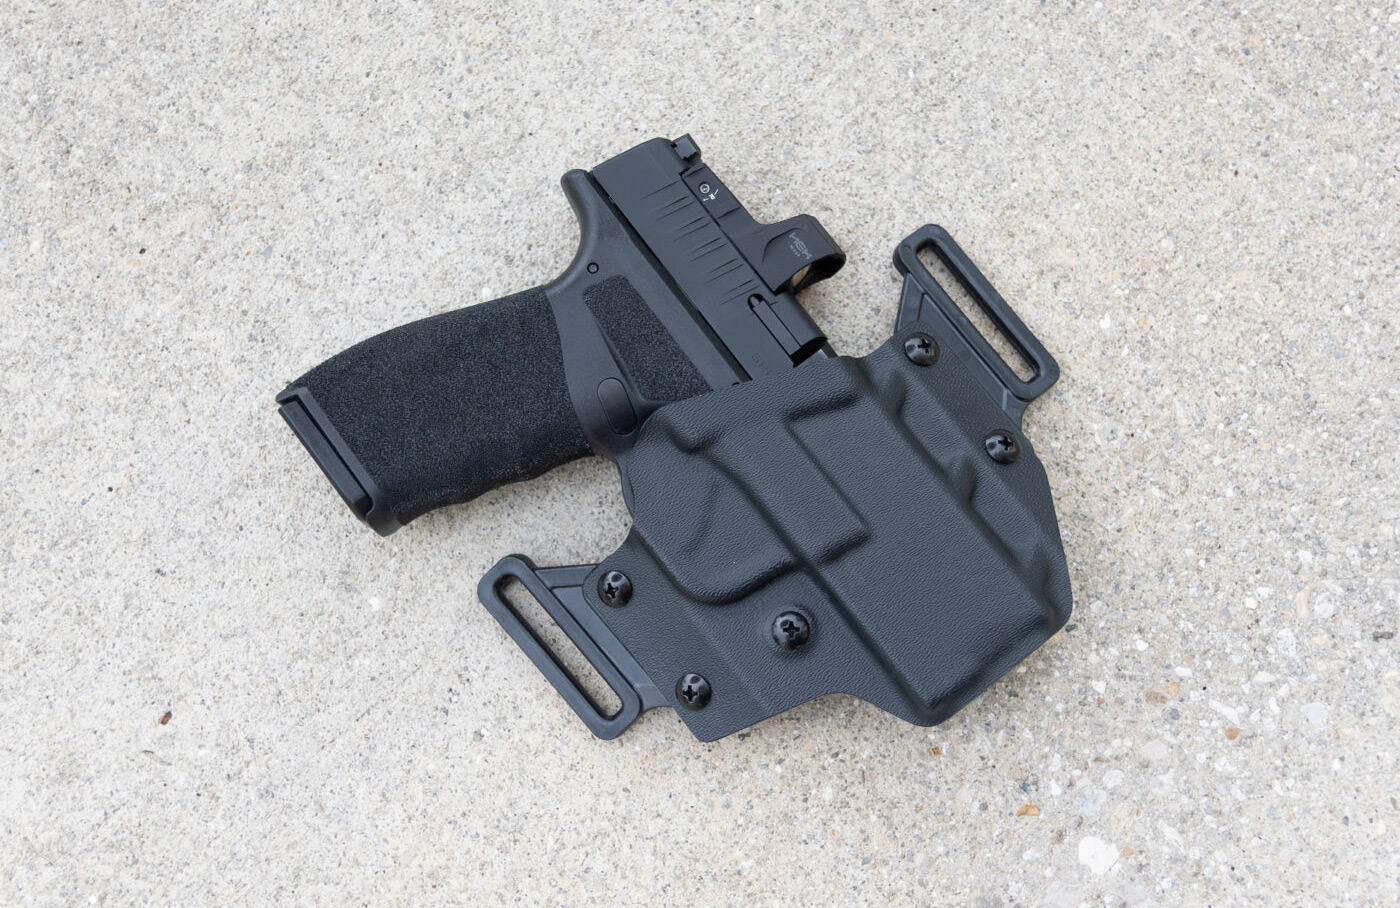 Crucial Concealment Covert OWB holster for the Hellcat Pro with pistol holstered inside